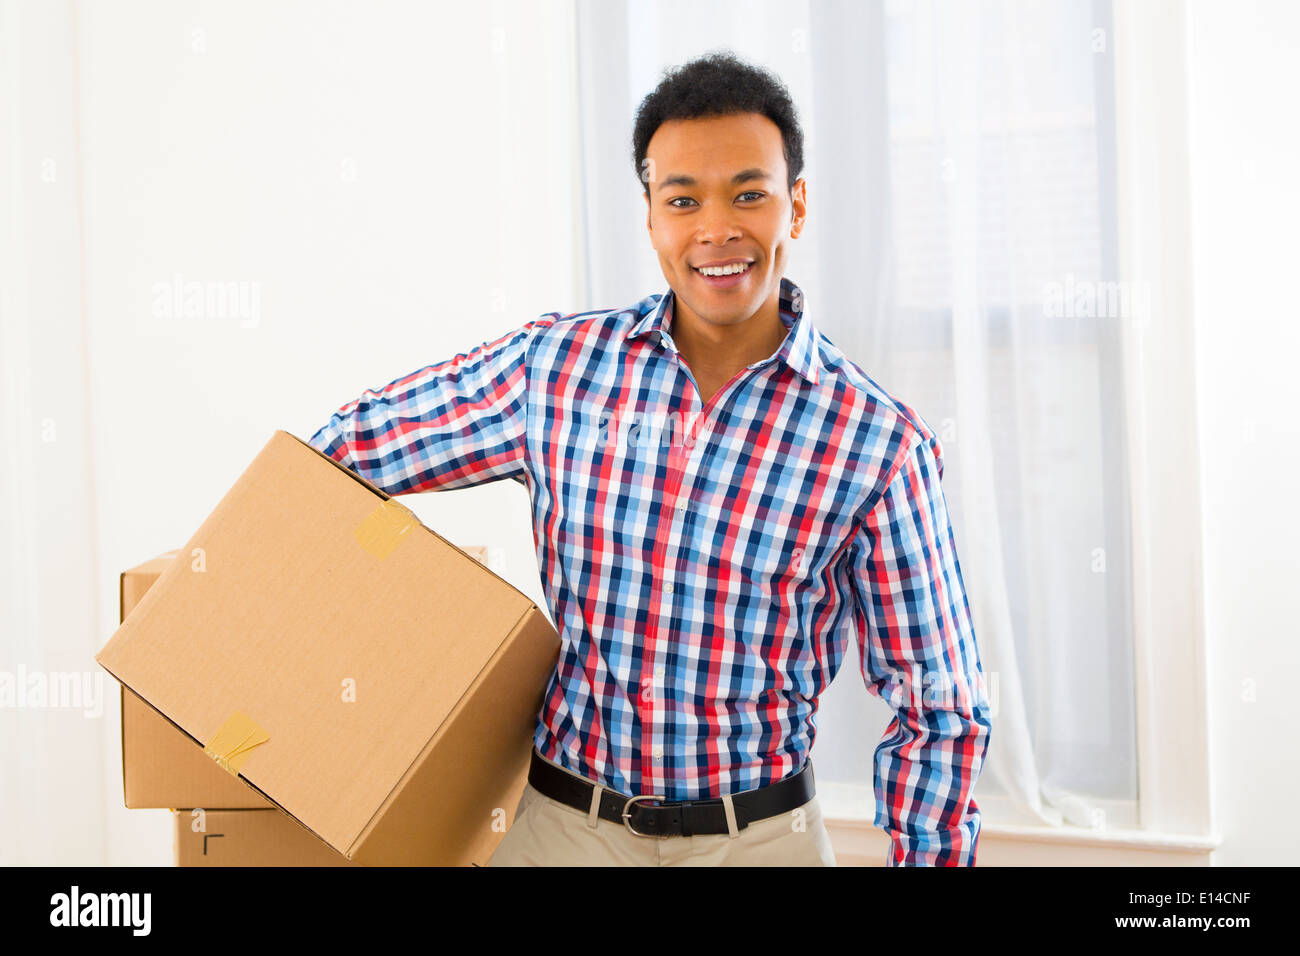 Mixed Race man carrying cardboard box in new home Banque D'Images